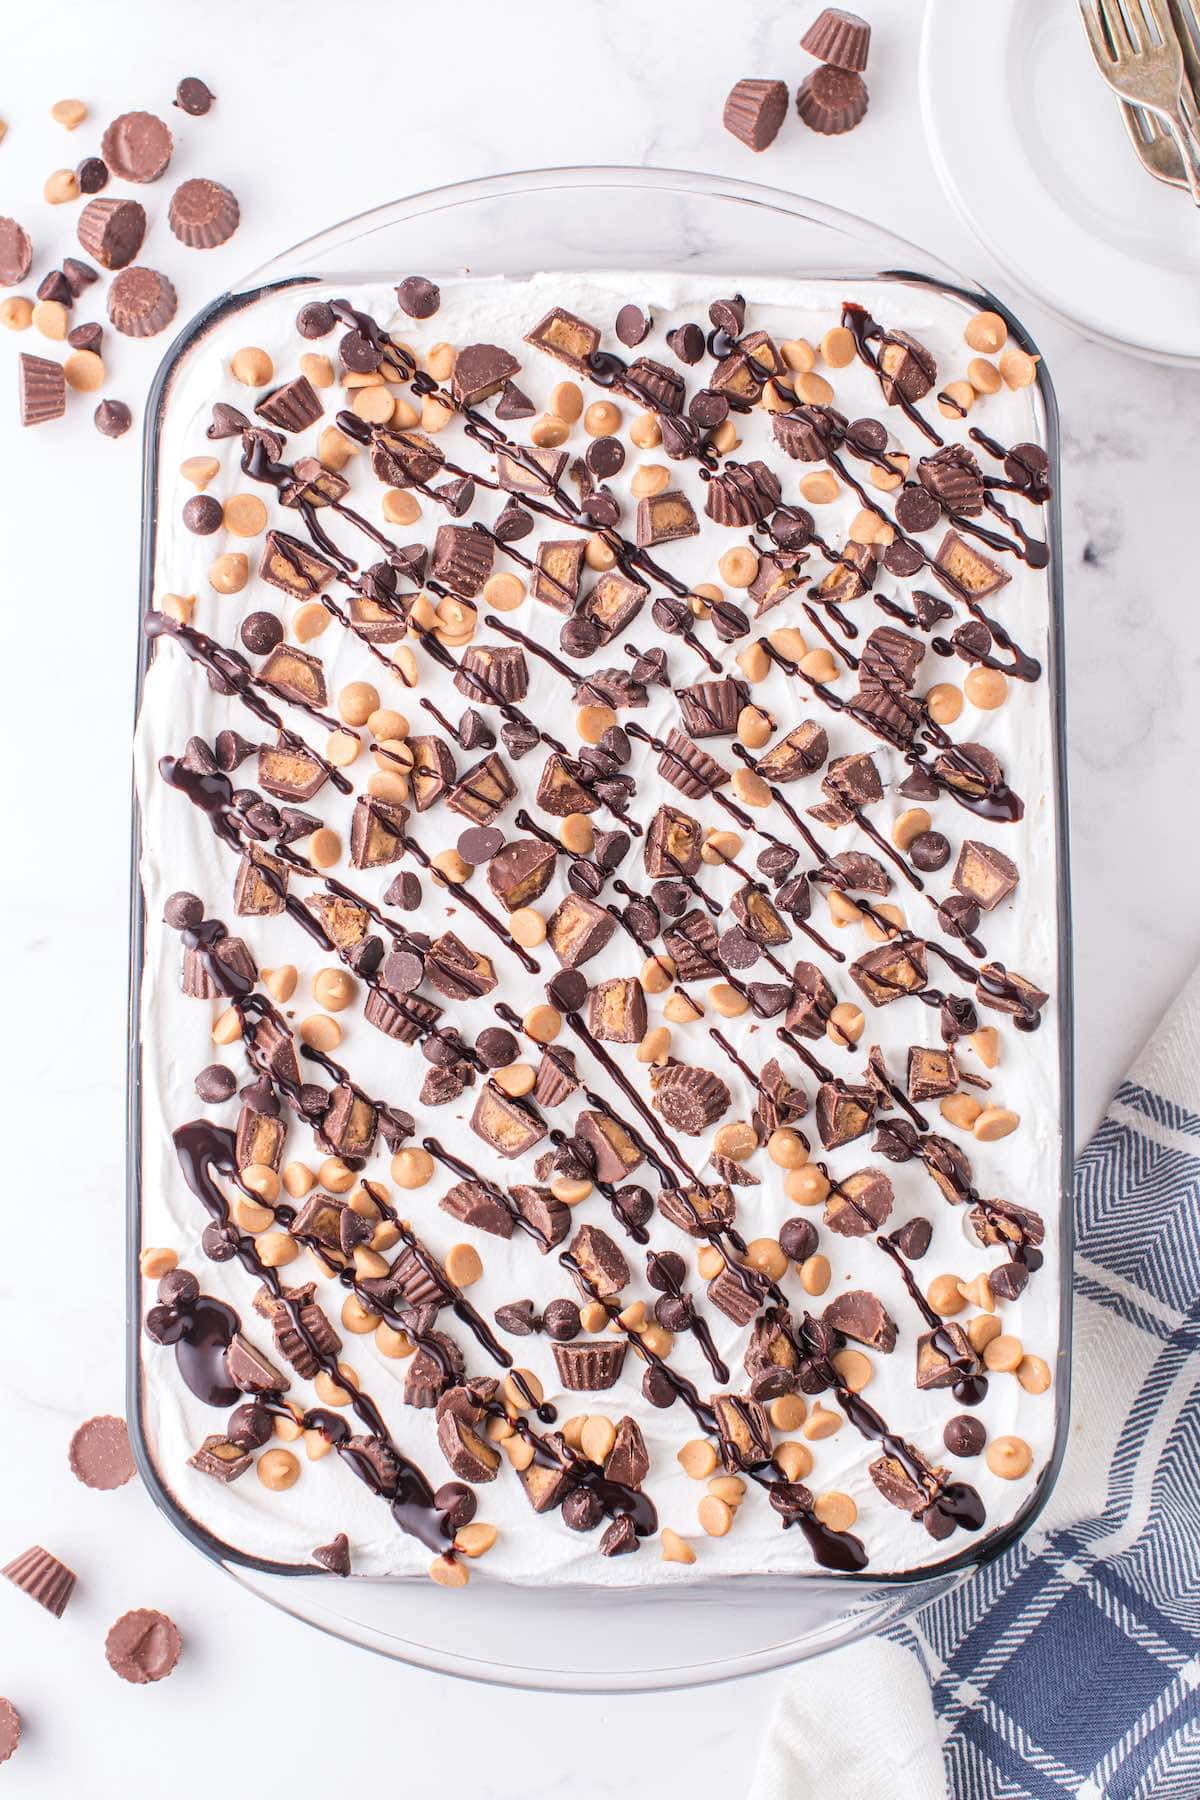 Top with whipped topping, peanut butter chips, chocolate chips, Reese’s cups and syrup